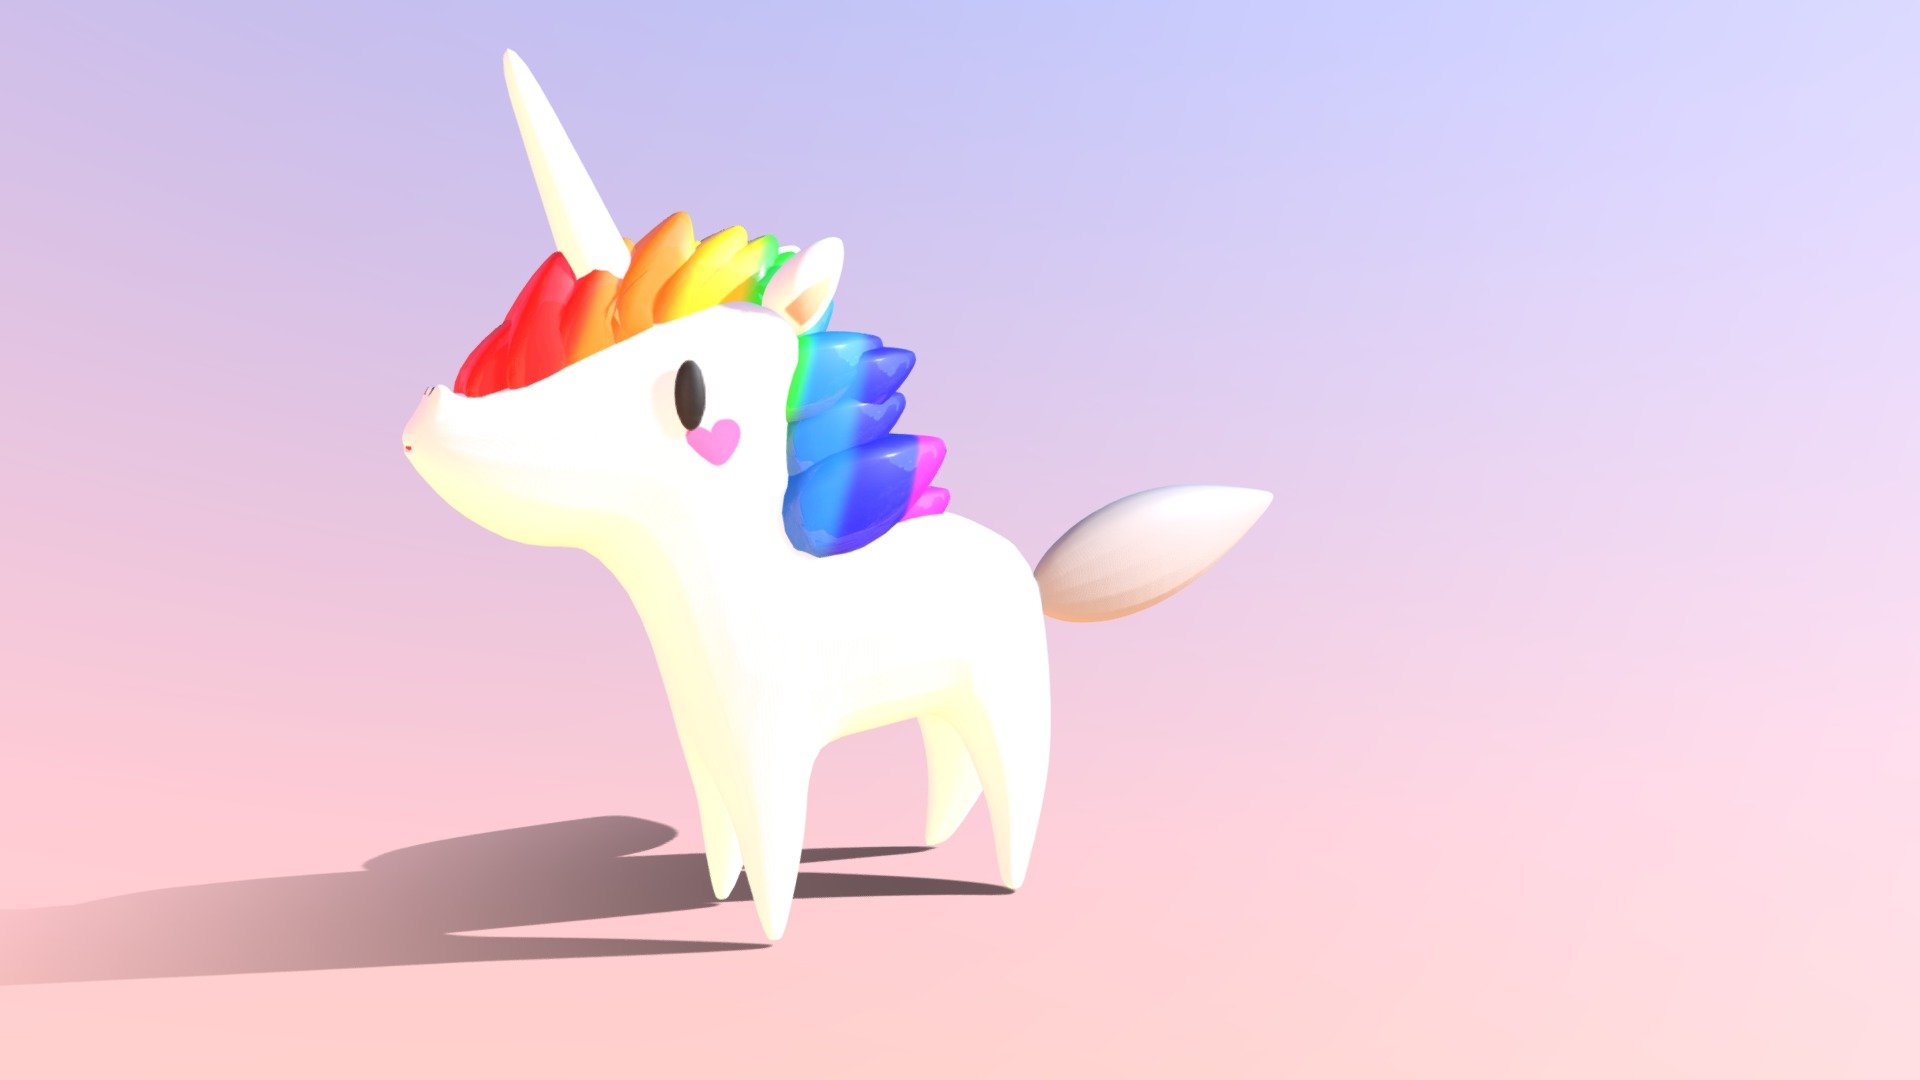 Basic Unicorn Character with rig and animations.

*** PLEASE NOTE*** 

Since this is a bit old model, the texture might gone/doesn't work in the newest version of blender 3d model